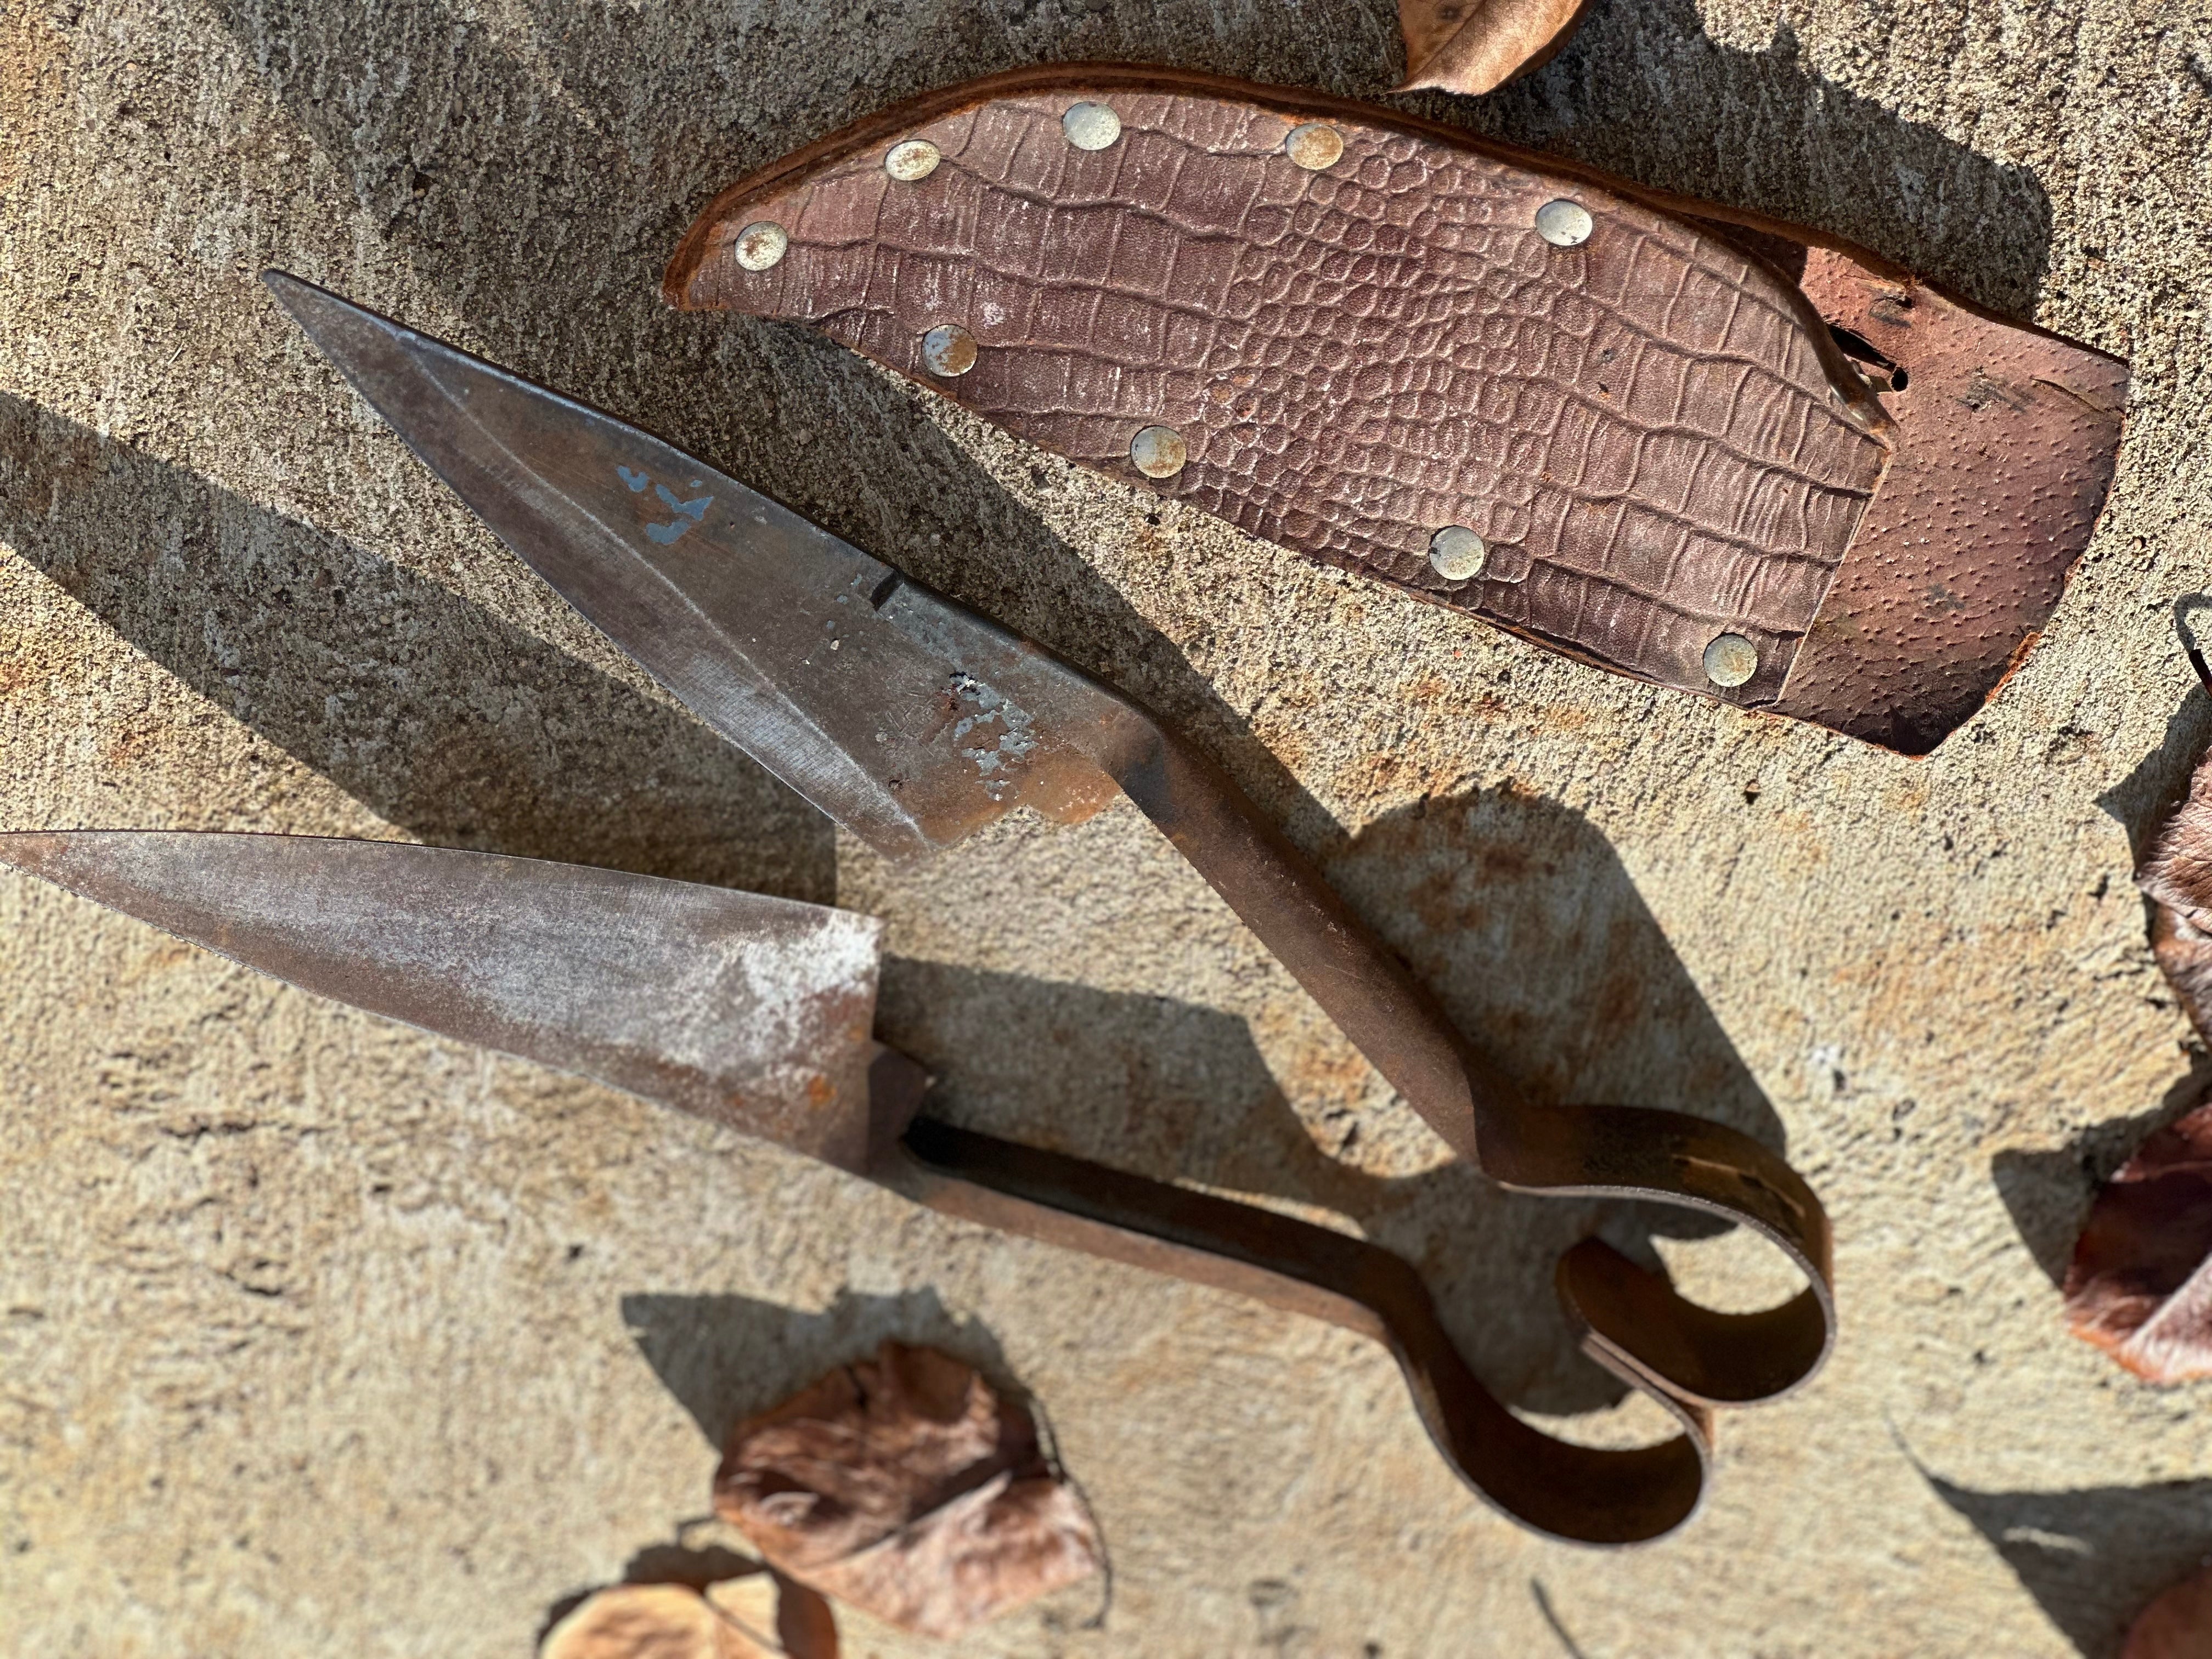 Vintage Shears with Original Leather Pouch